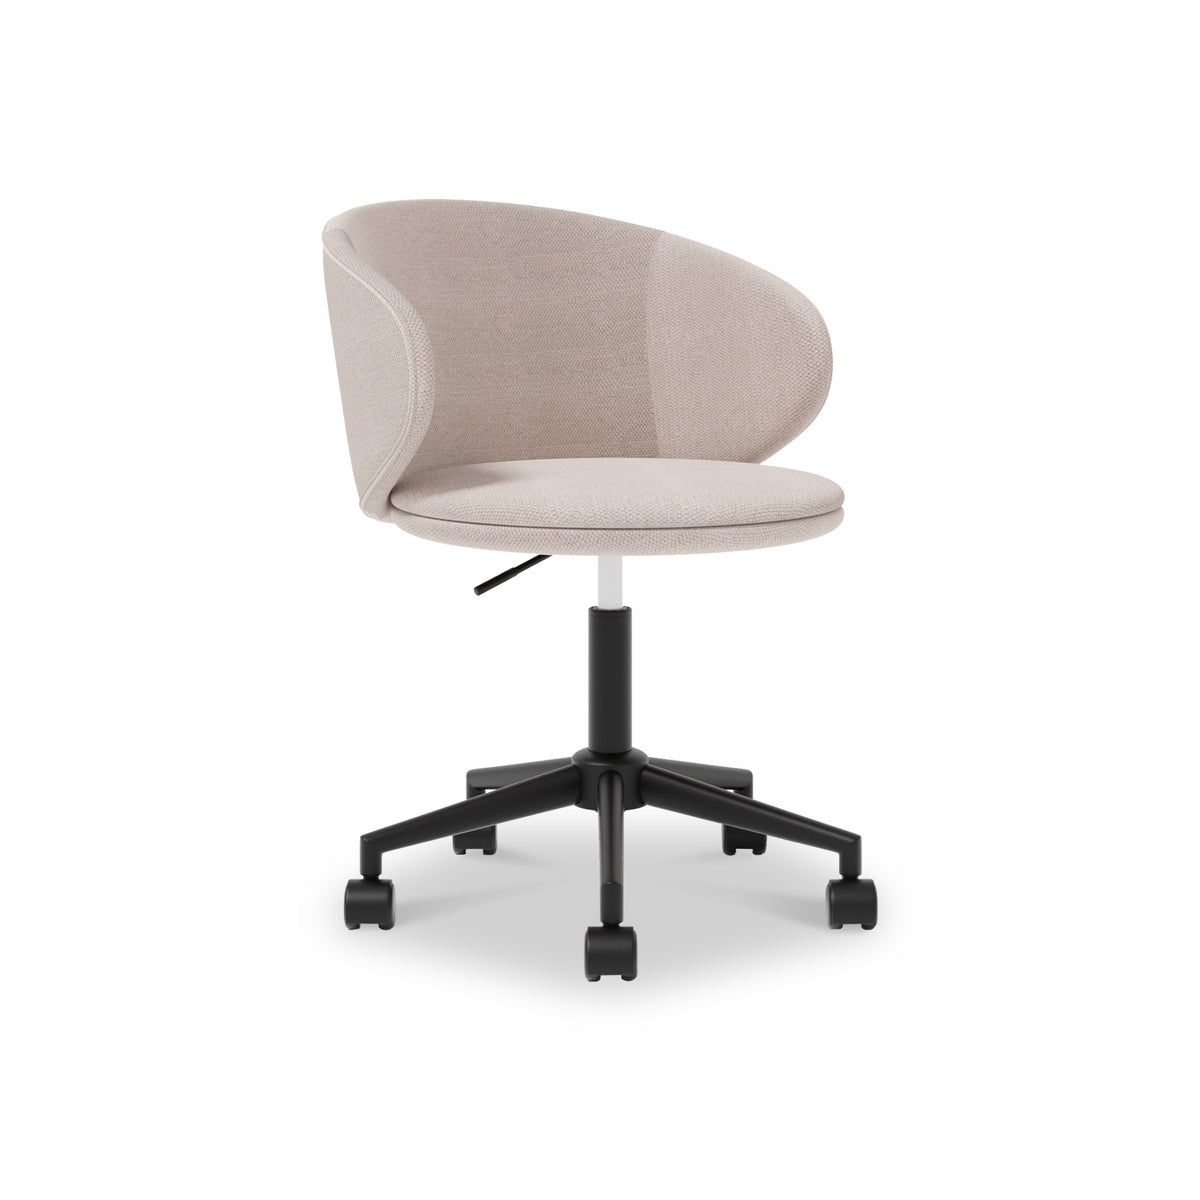 Clara Height Adjustable Swivel Office Chair from Roseland Furniture